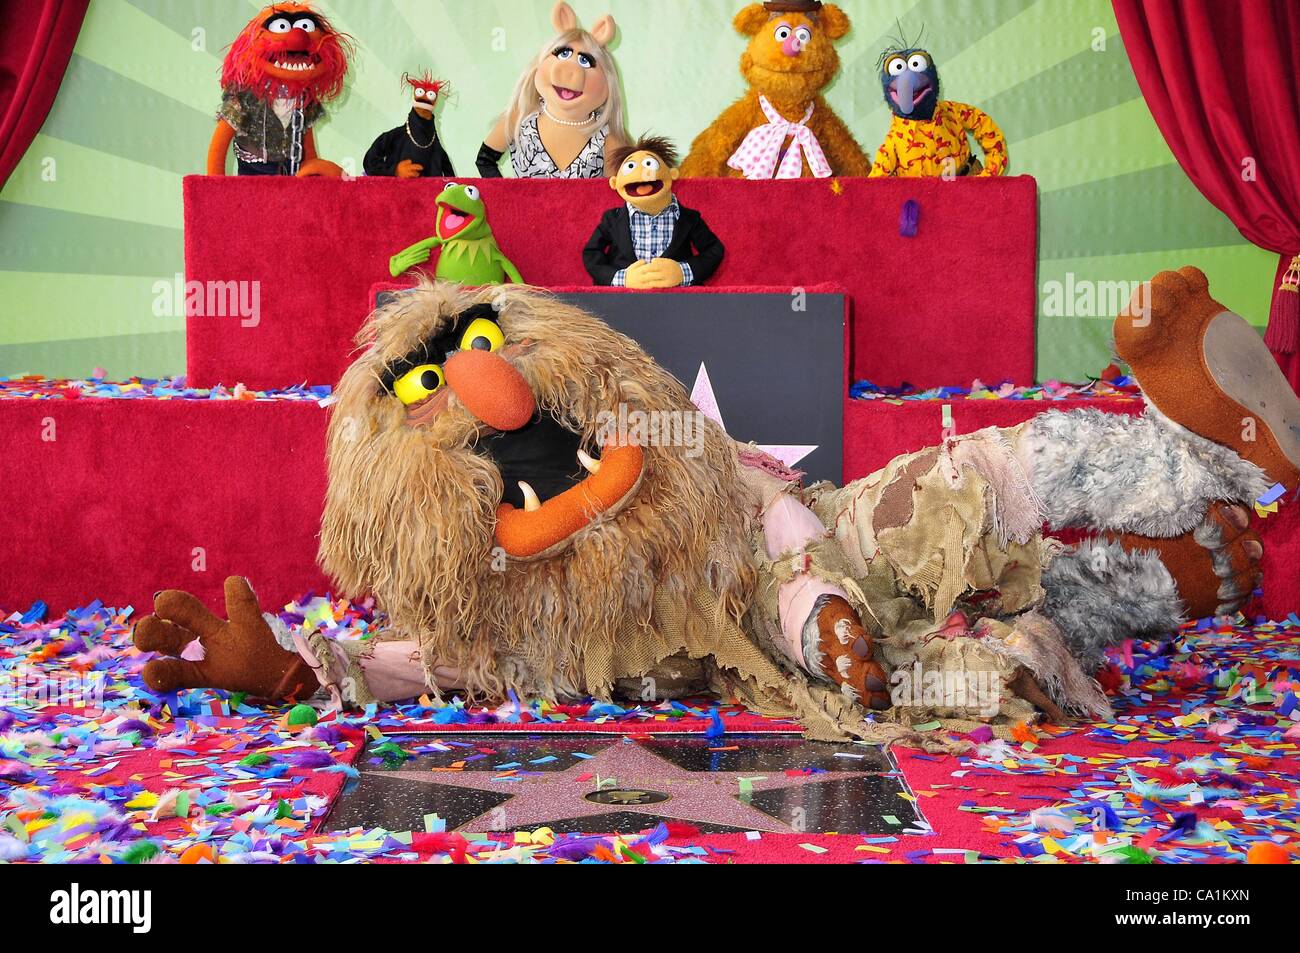 Animal, Pepe, Kermit, Sweetums, Miss Piggy, Walter, Fozzie, Gonzo at the induction ceremony for Star on the Hollywood Walk of Fame forThe Muppets, Hollywood Boulevard, Los Angeles, CA March 20, 2012. Photo By: Michael Germana/Everett Collection Stock Photo